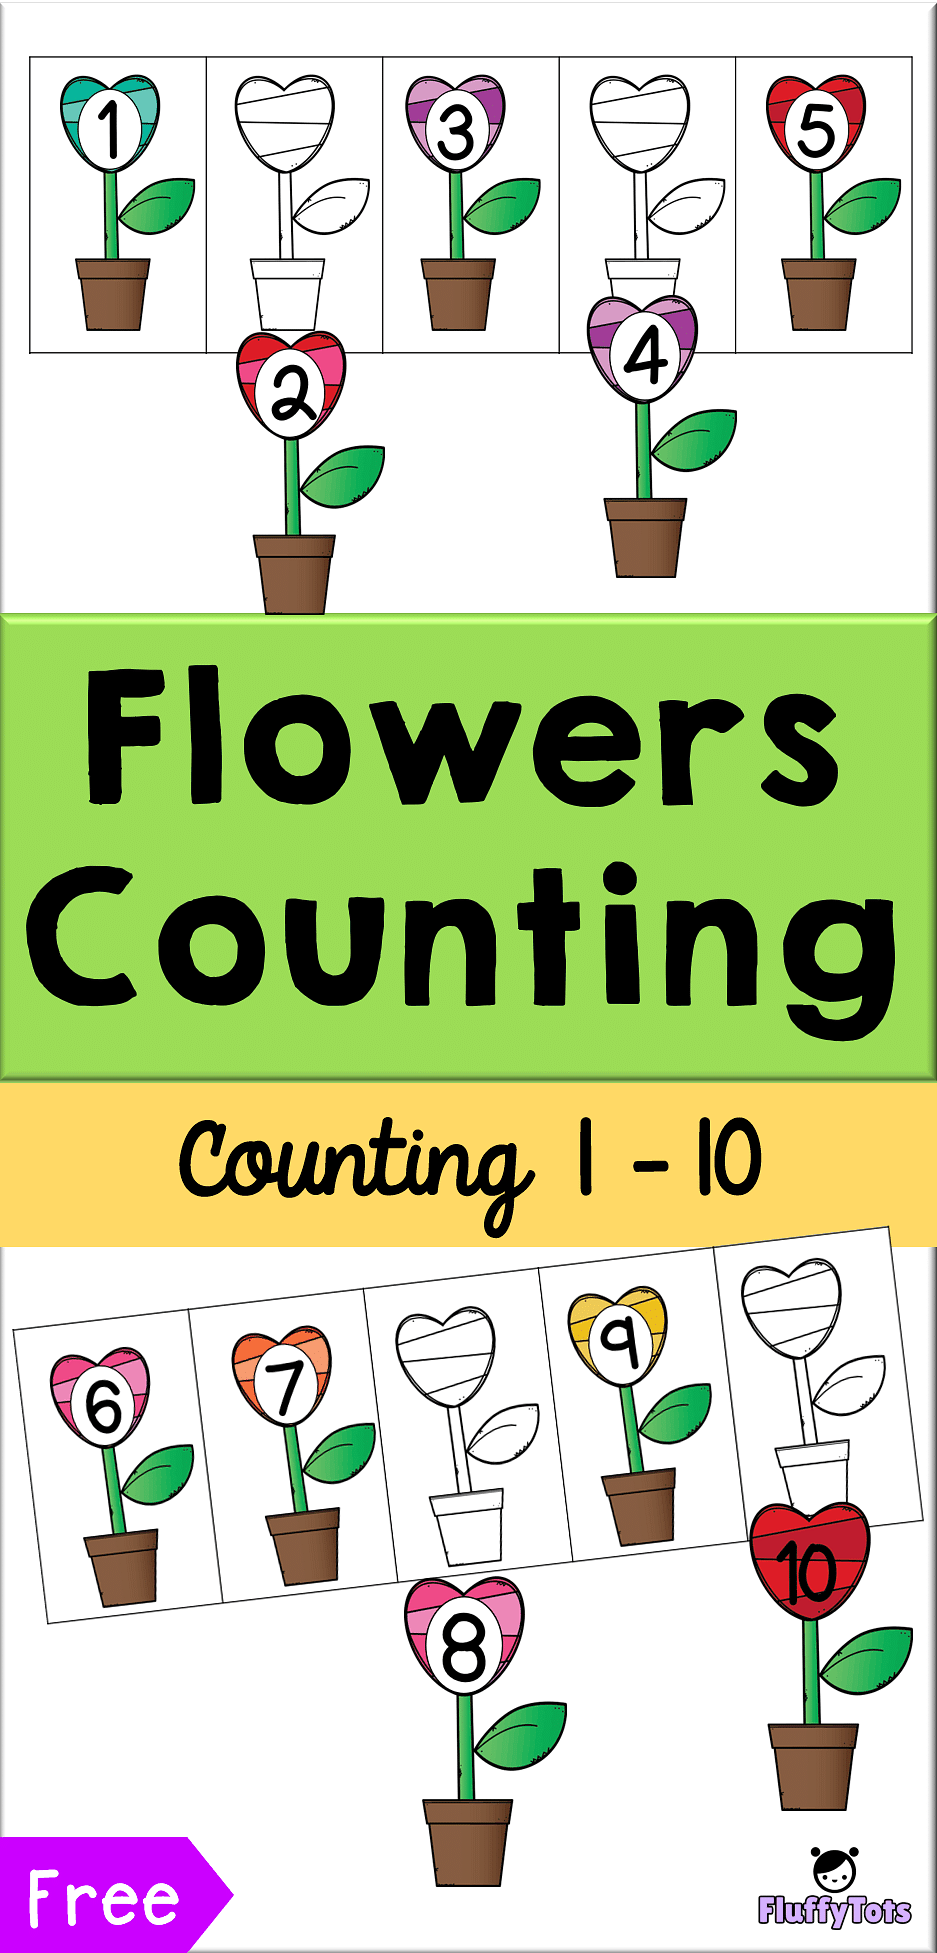 Flowers counting